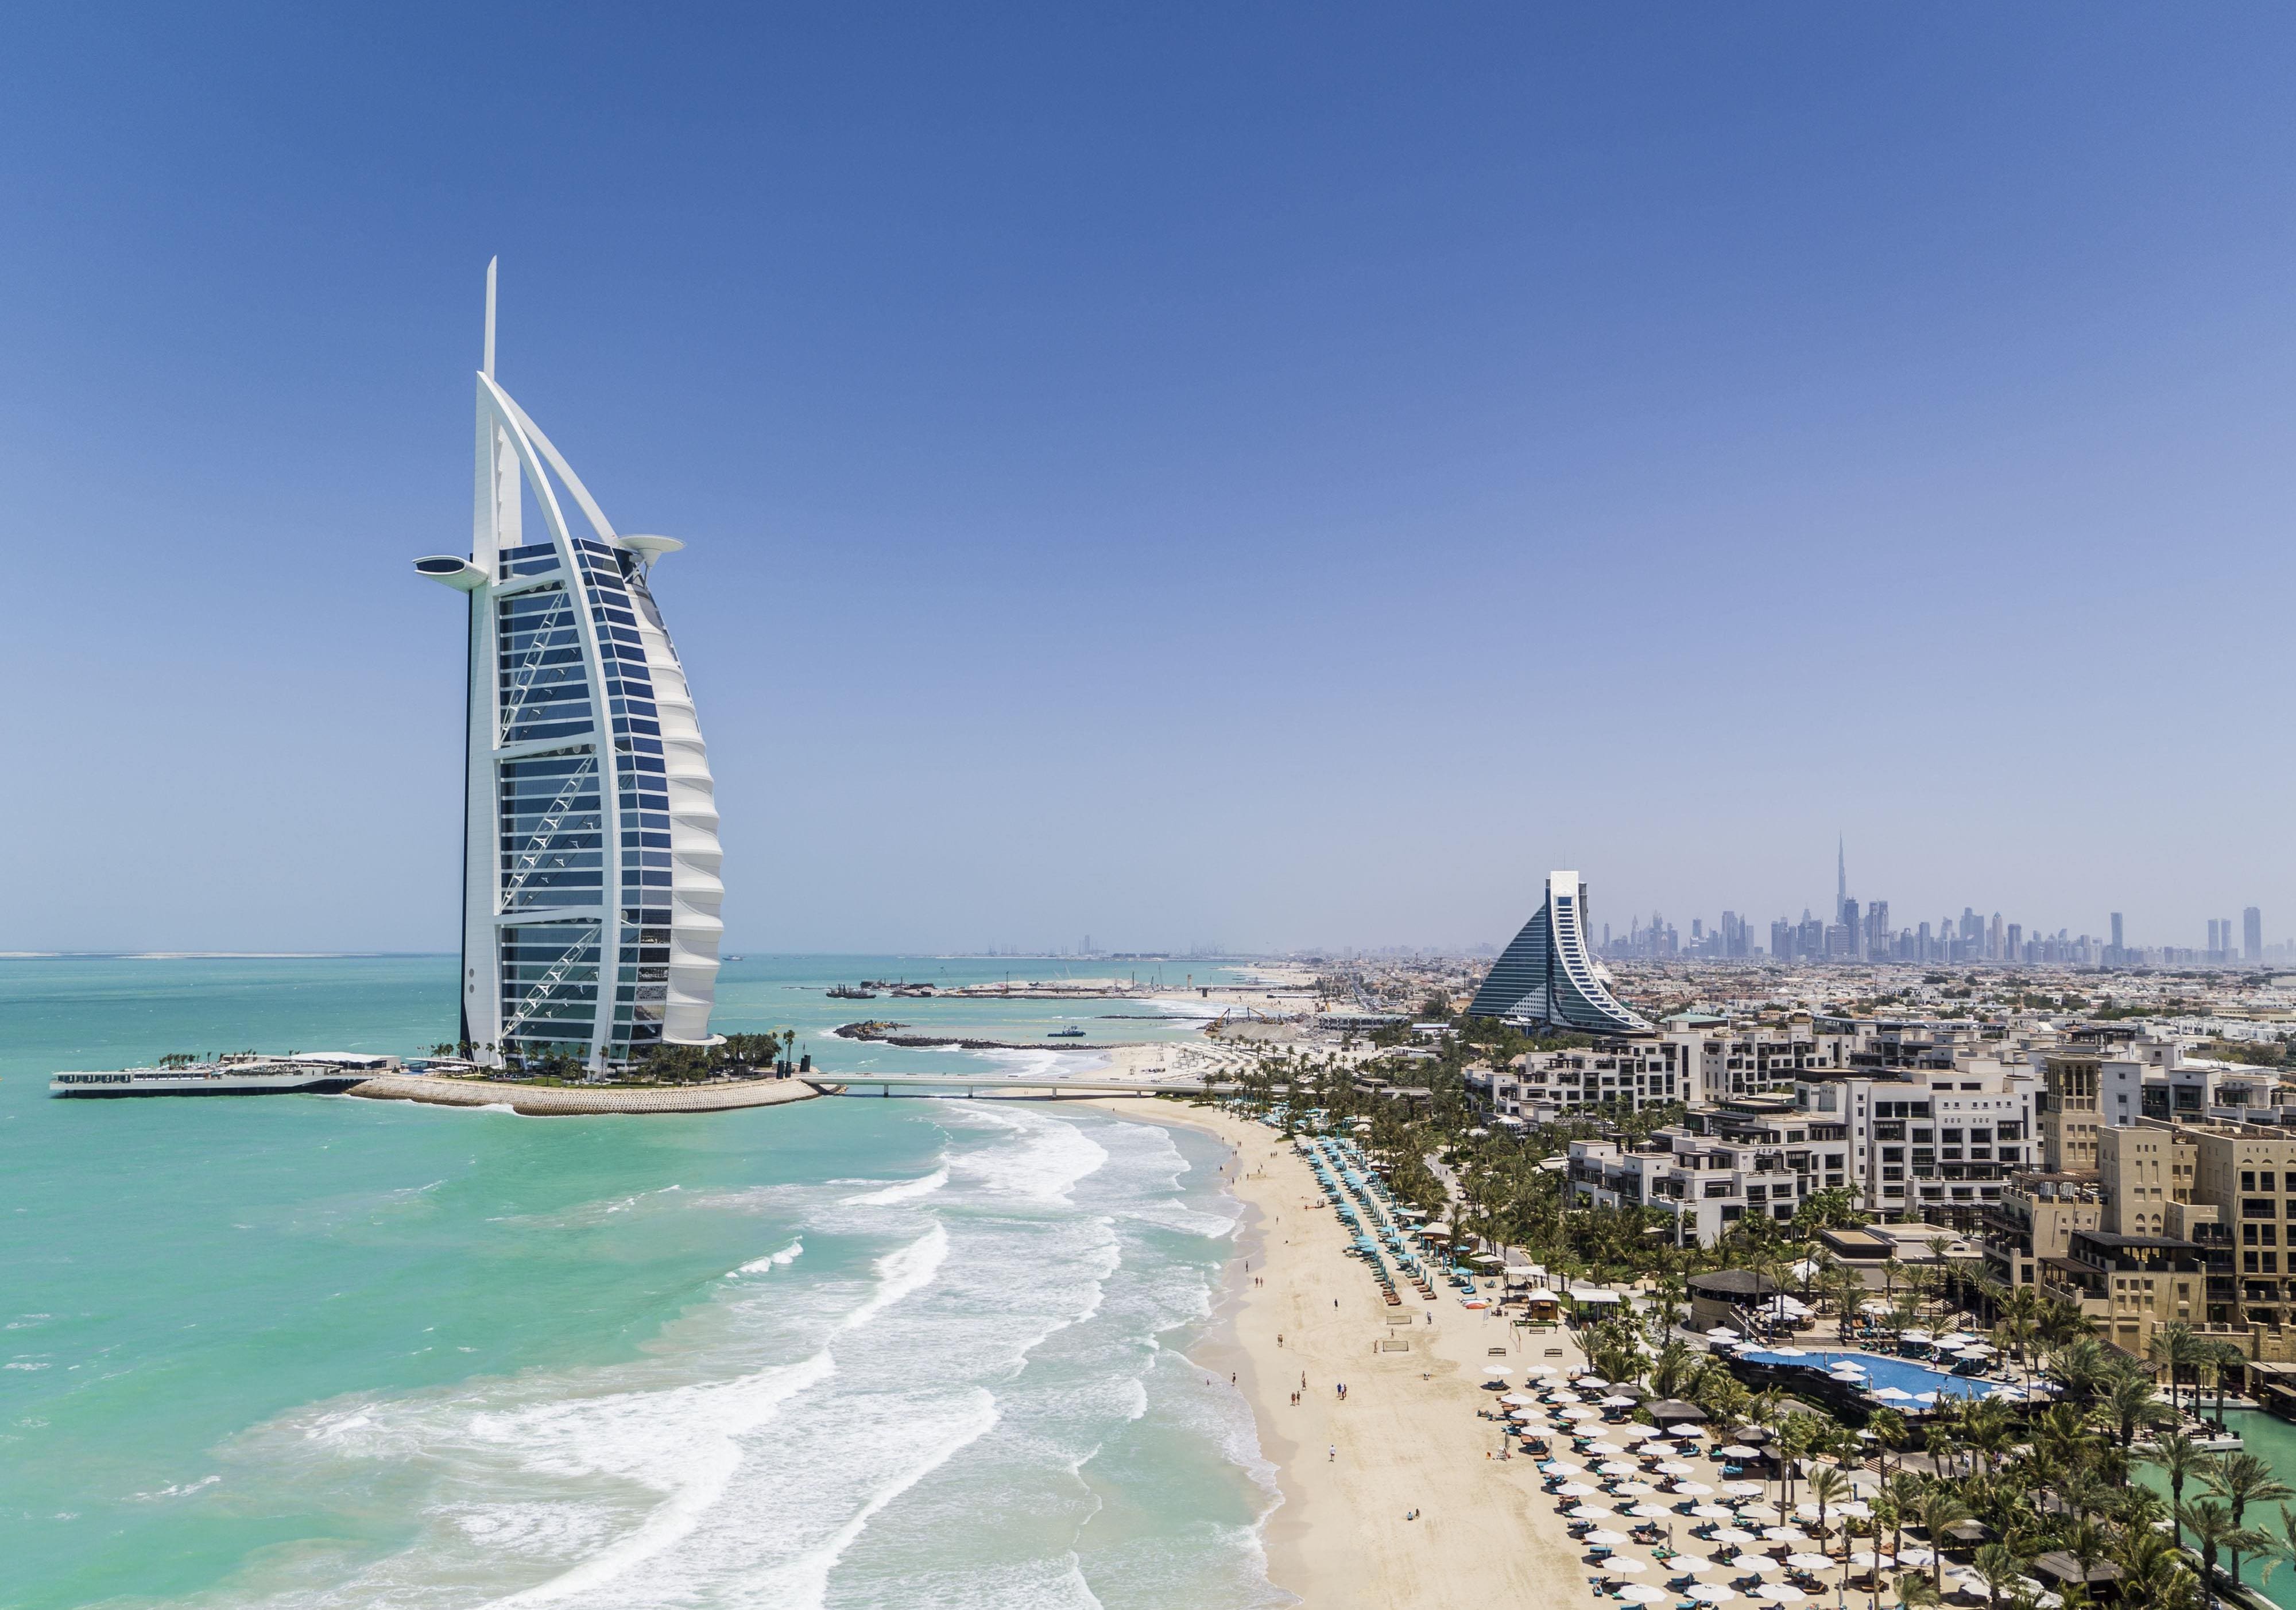 Over 7 million international visitors visited Dubai during the first half of 2022, an increase of over 183 percent year-on-year, according to Dubai’s Department of Economy and Tourism.